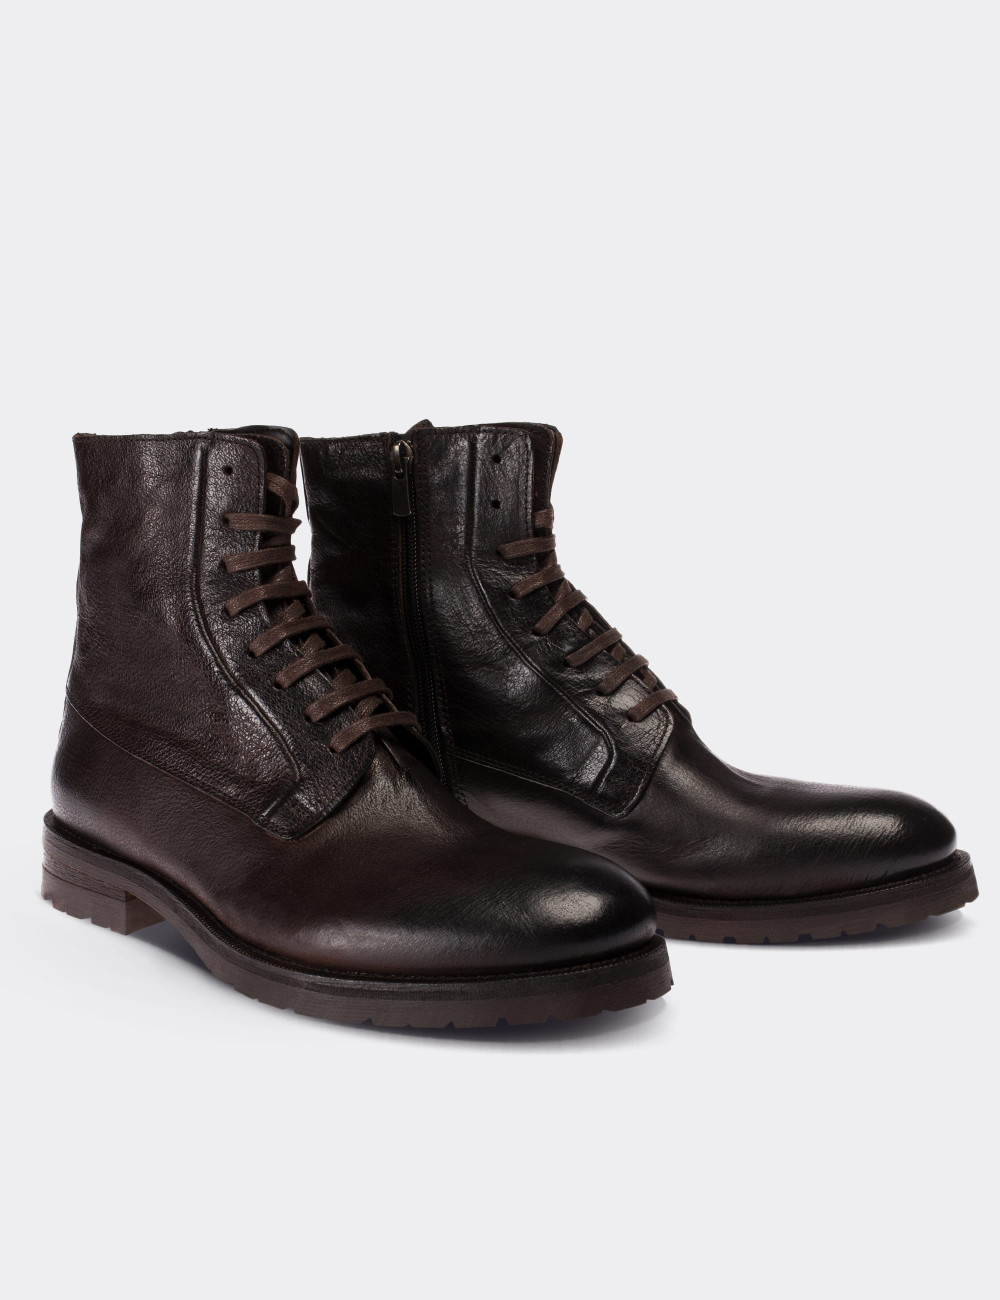 Brown  Leather Boots - 01324MKHVC01